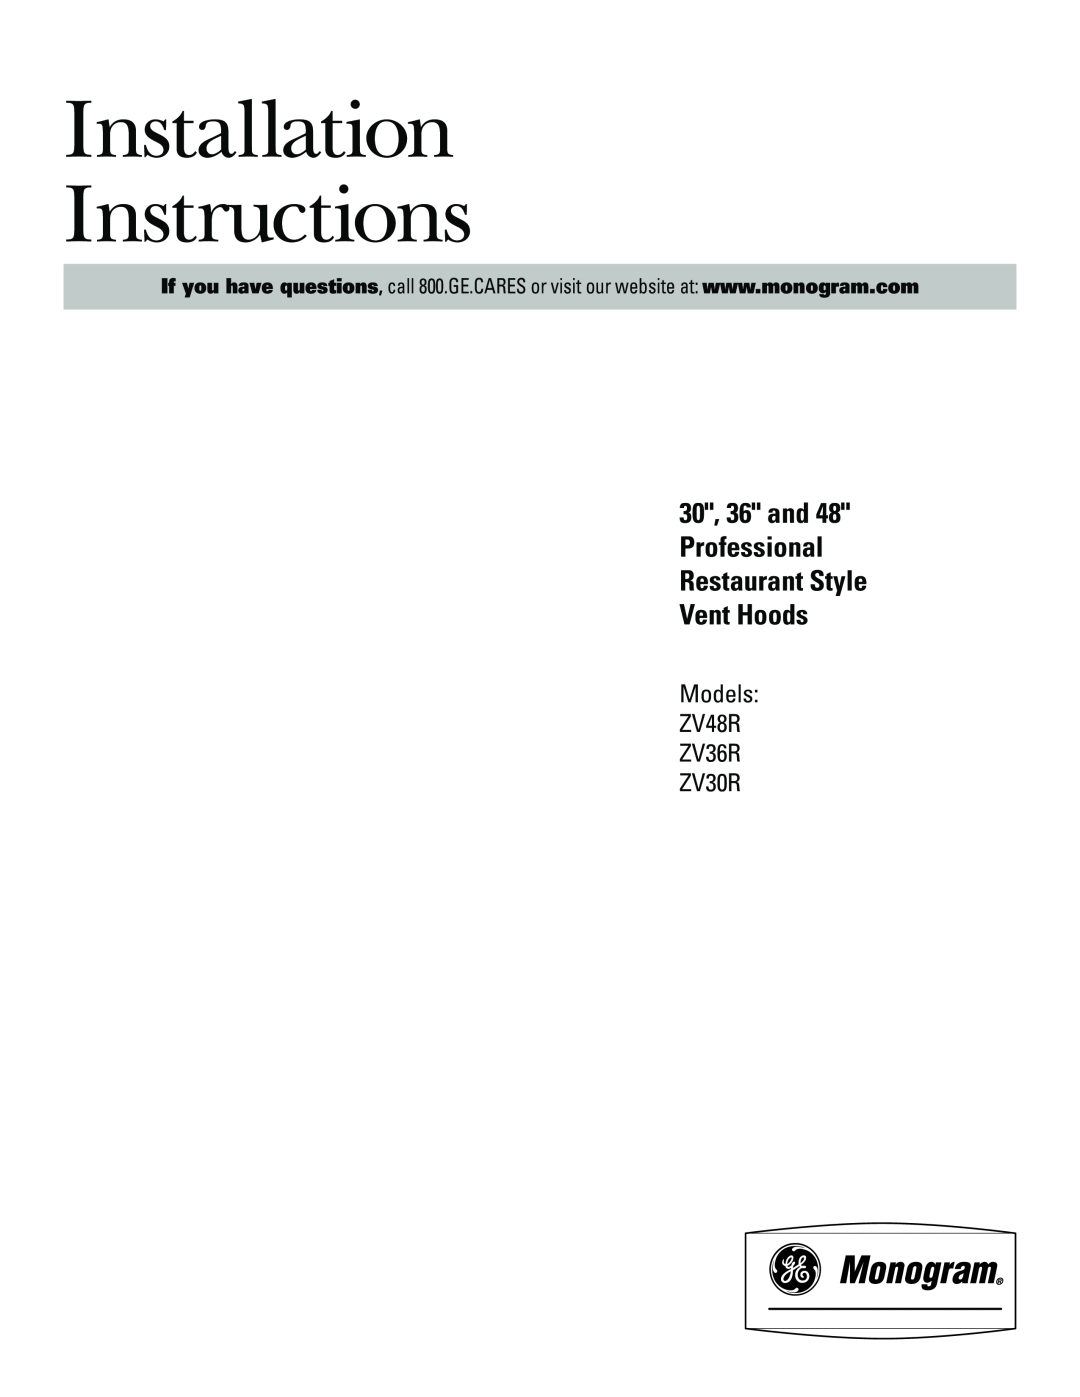 GE ZV30R installation instructions 30, 36 and 48 Professional Restaurant Style Vent Hoods, Installation Instructions 